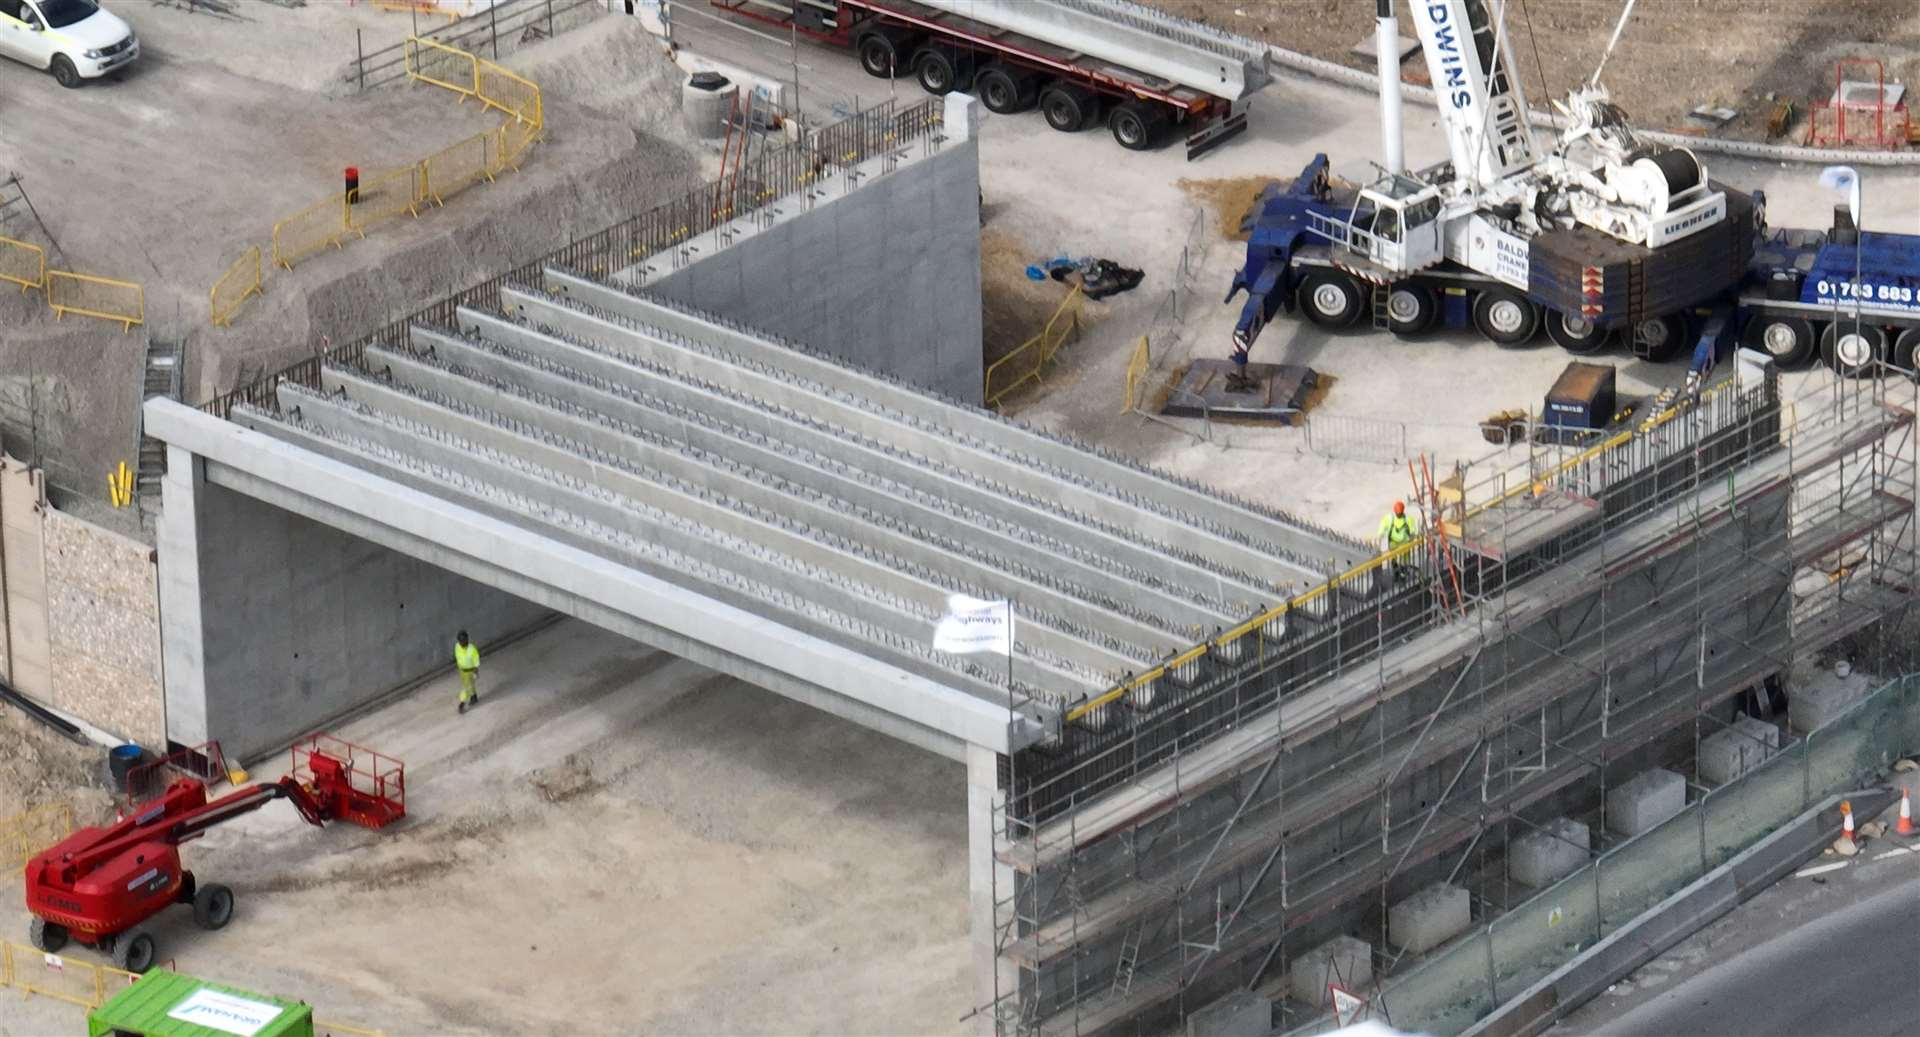 A drone has captured the new concrete bridge beams for the new Stockbury flyover. Picture: Phil Drew